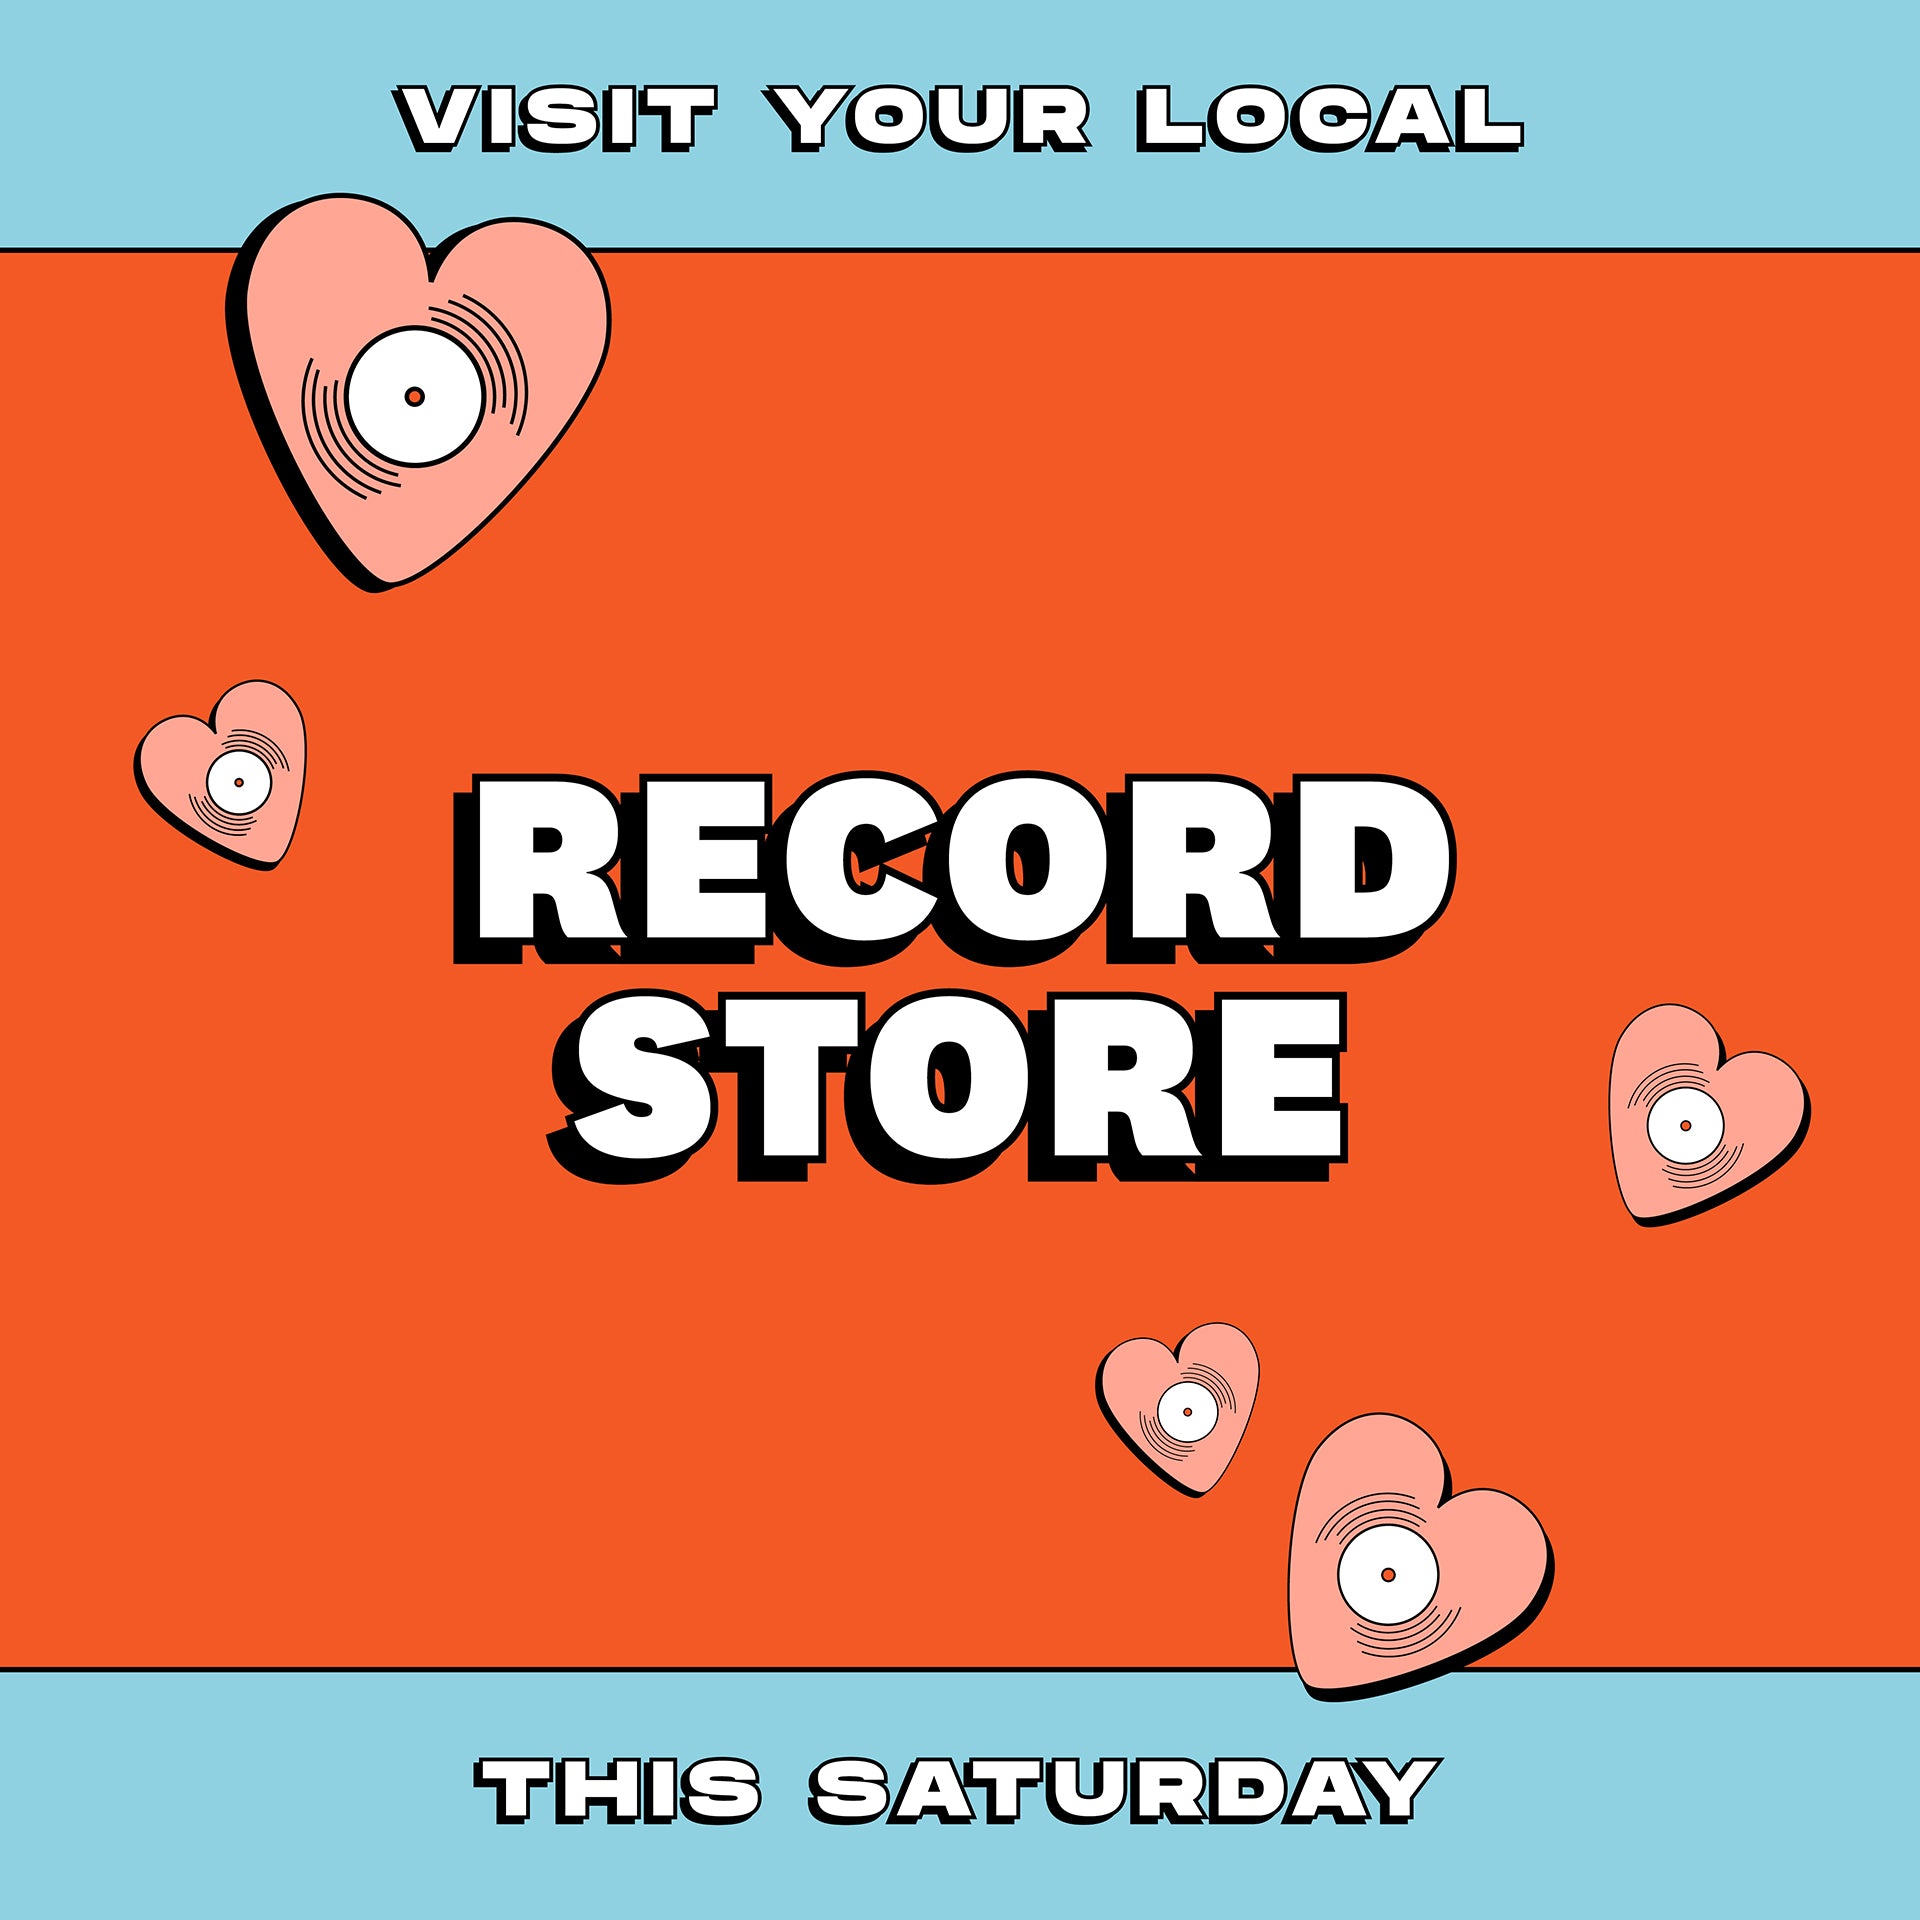 We all Love Record Stores